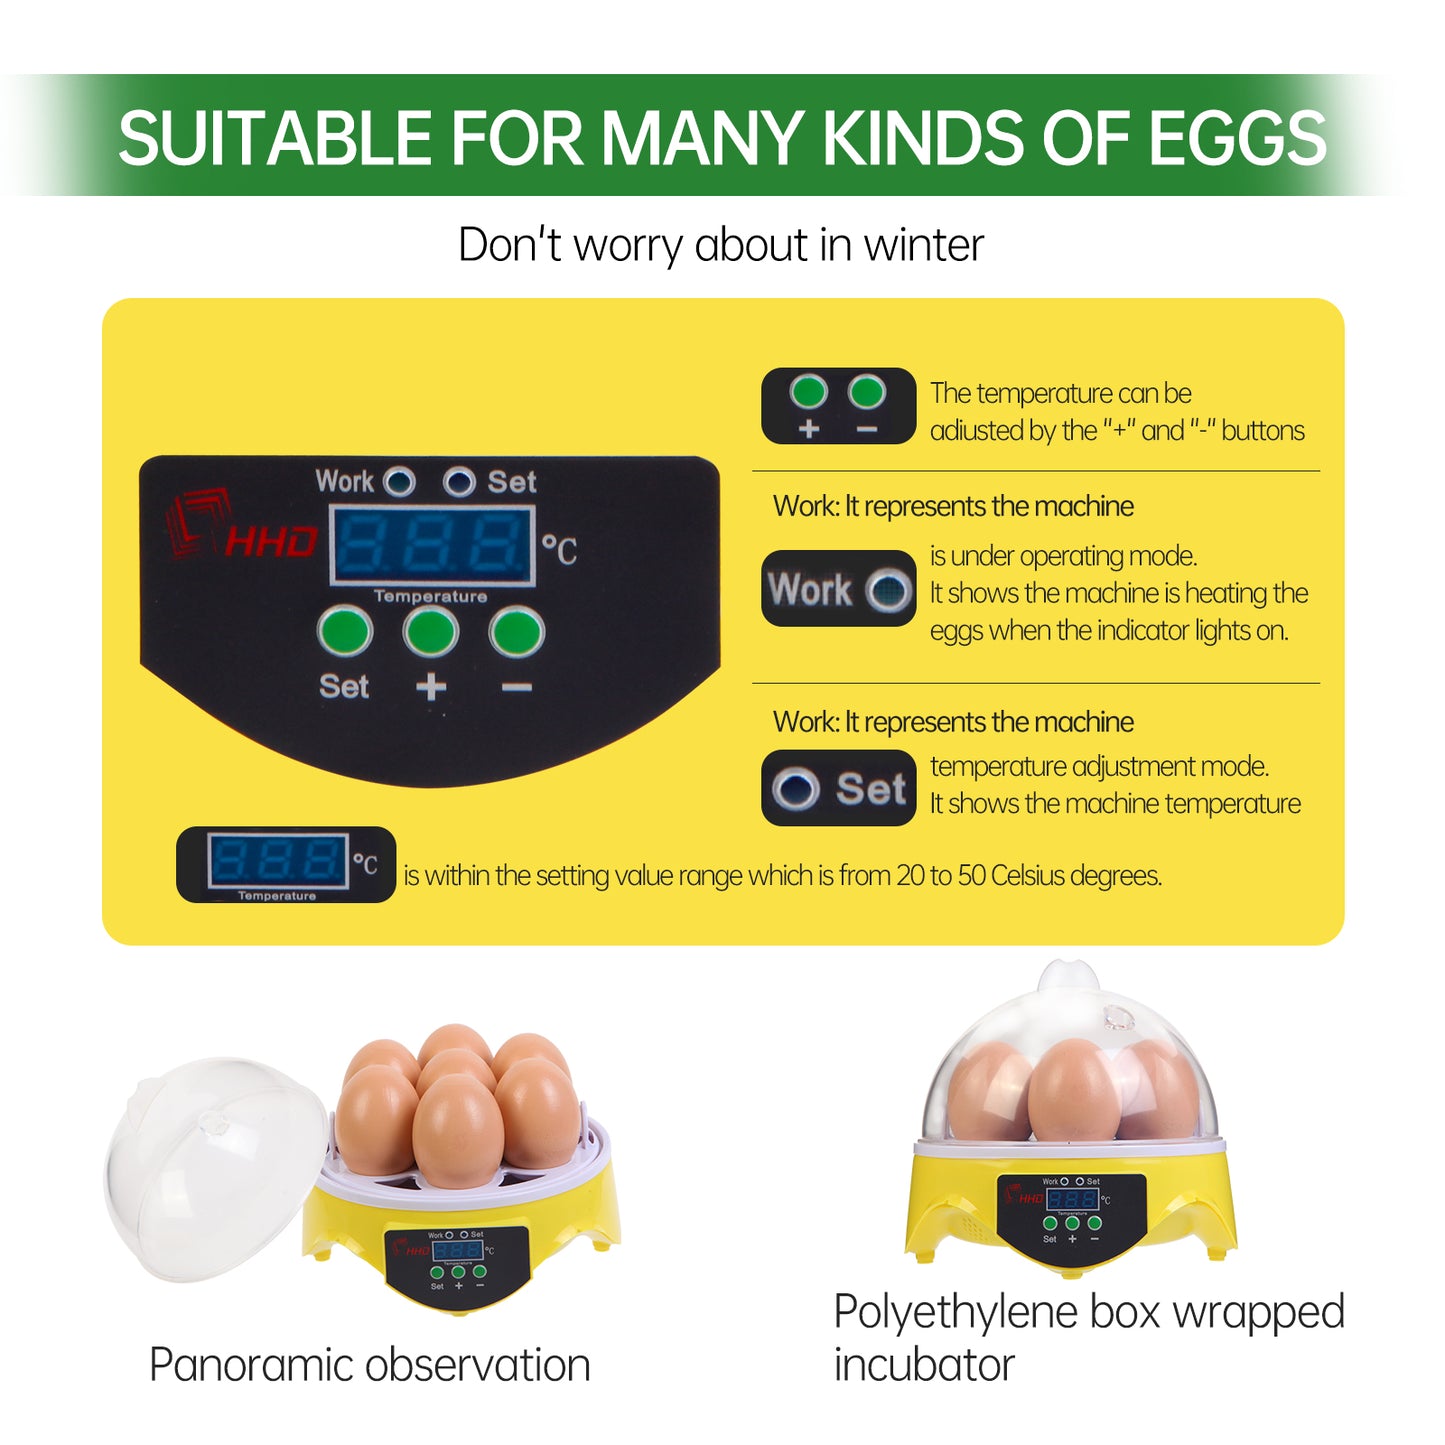 ZEMIRO CHARGE 7-Egg Incubator 360° View Poultry Incubator with Manual Temperature Control for Hatching Chicken, Duck, Goose, Parrot, and Quail Eggs